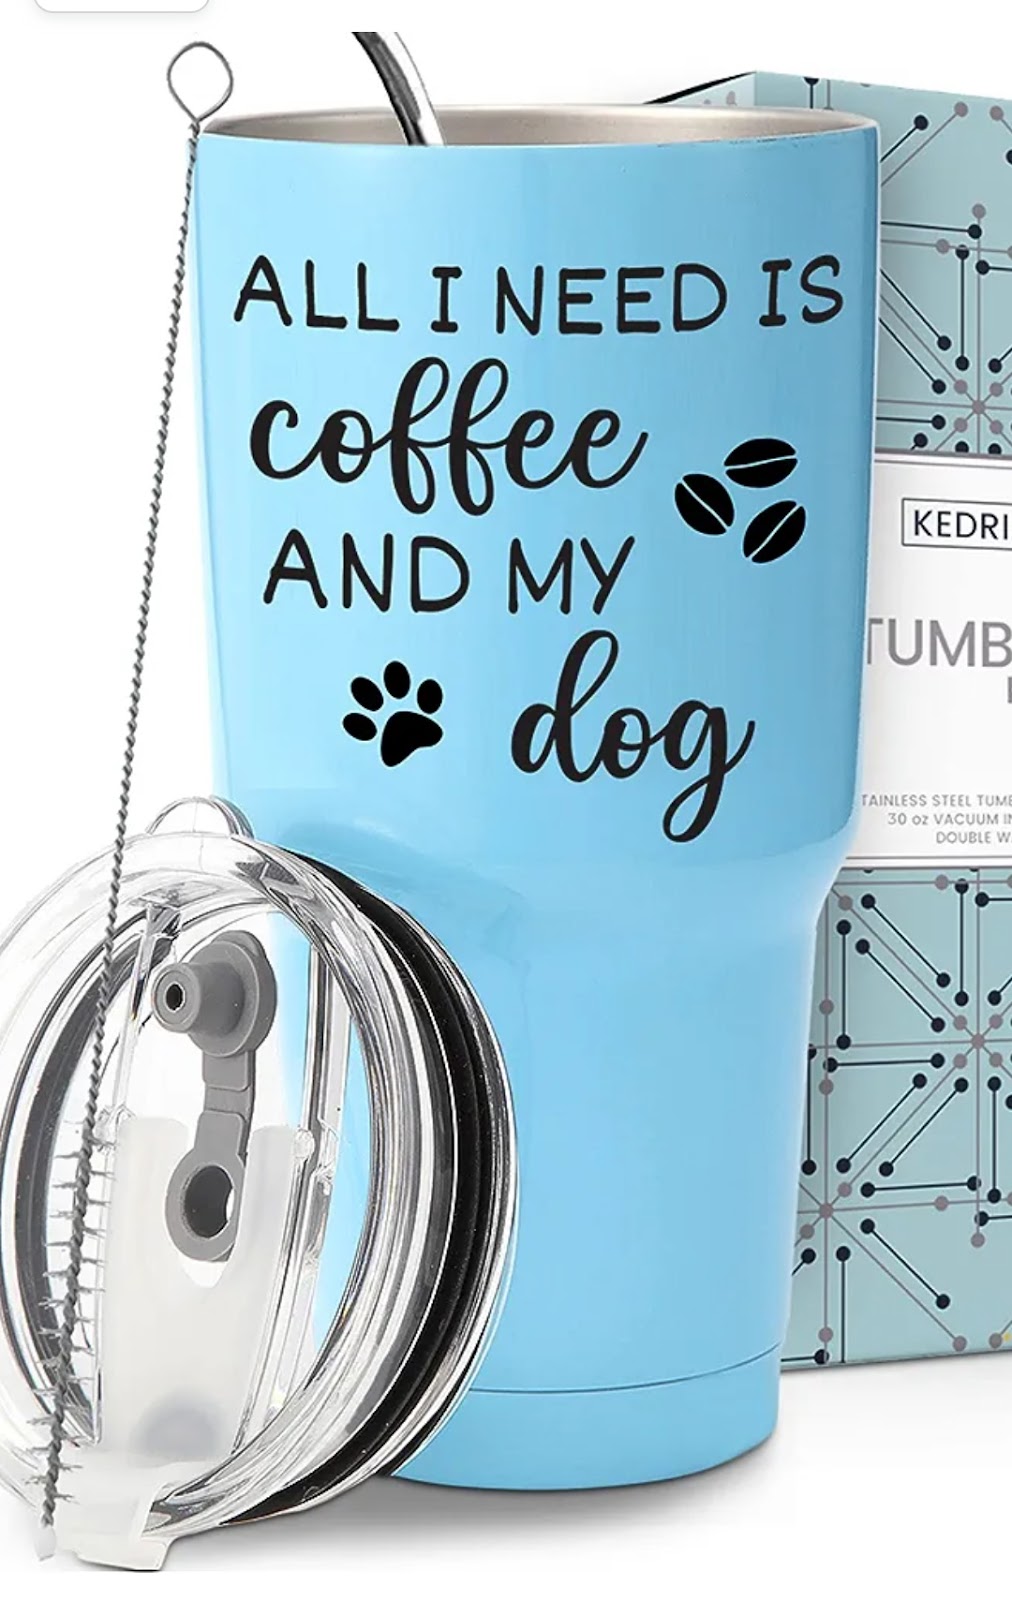 kedrian dog mom tumblr top 20 christmas gifts for girlfriend with a dog